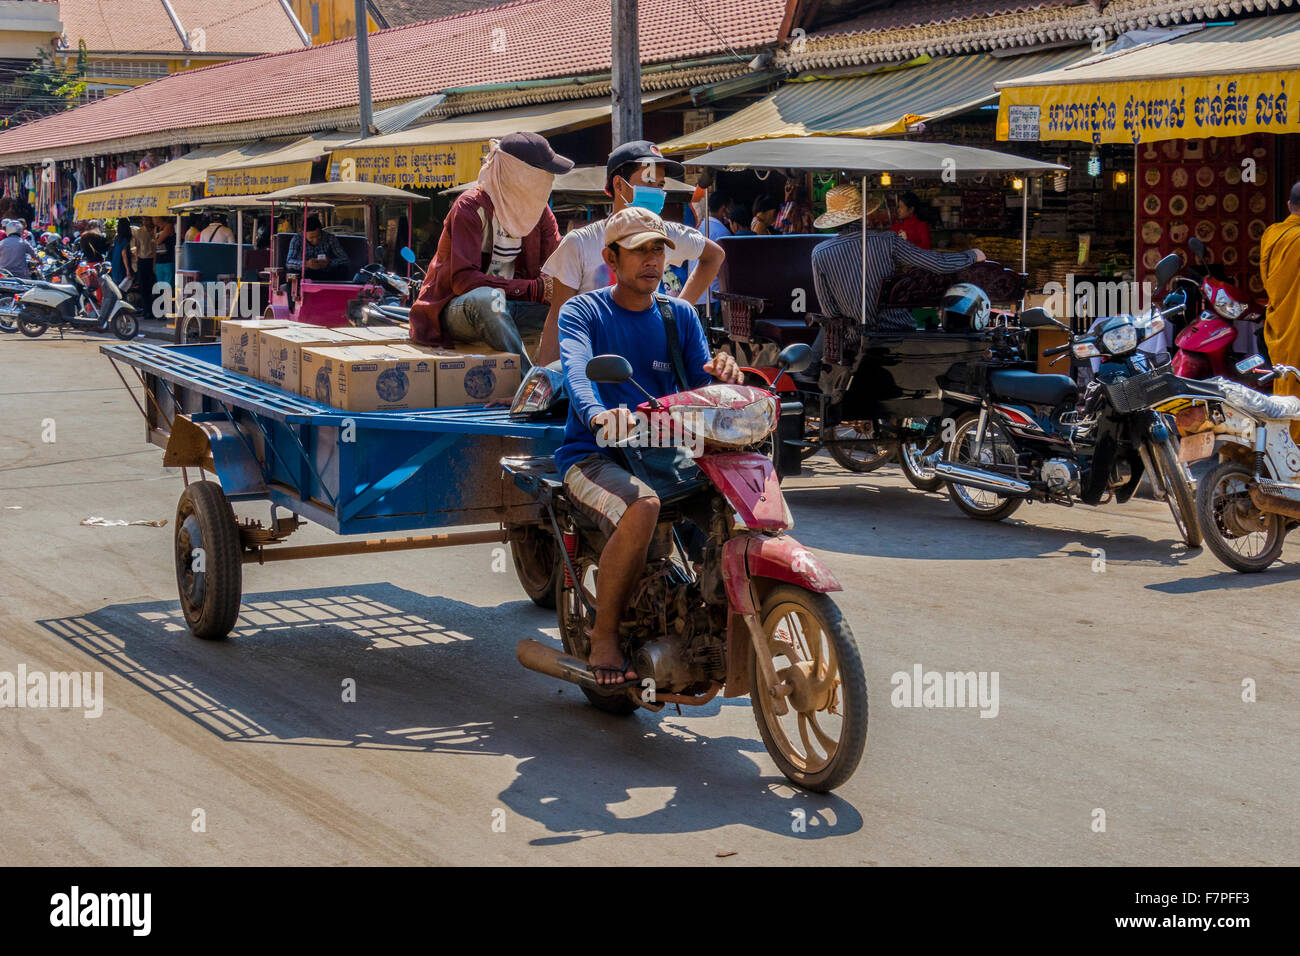 Motorcycle towing cart with goods on from one area to the other in Siem Reap Cambodia Stock Photo